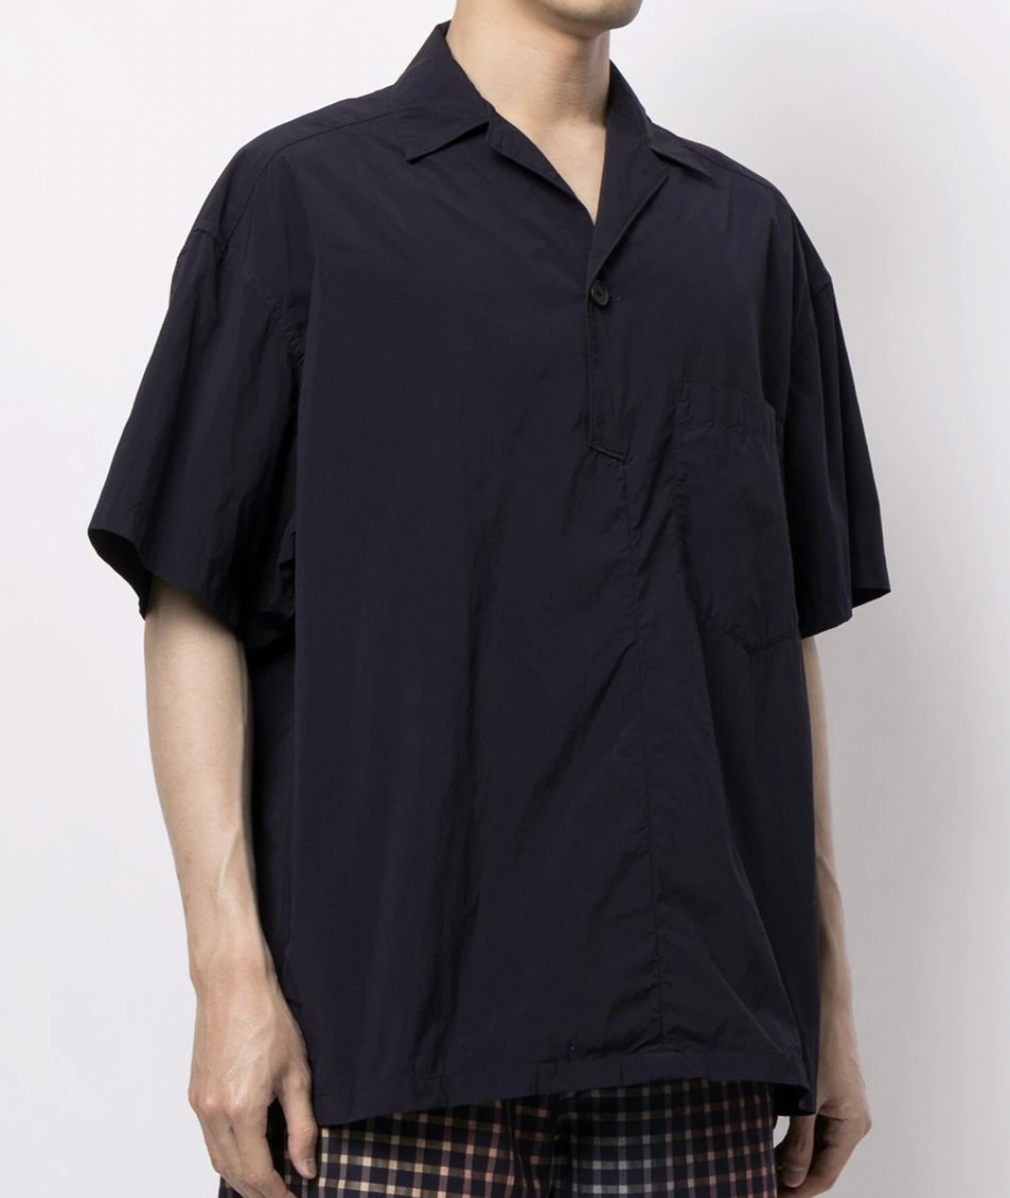 Pick up the oversized open collar shirts you want to wear right